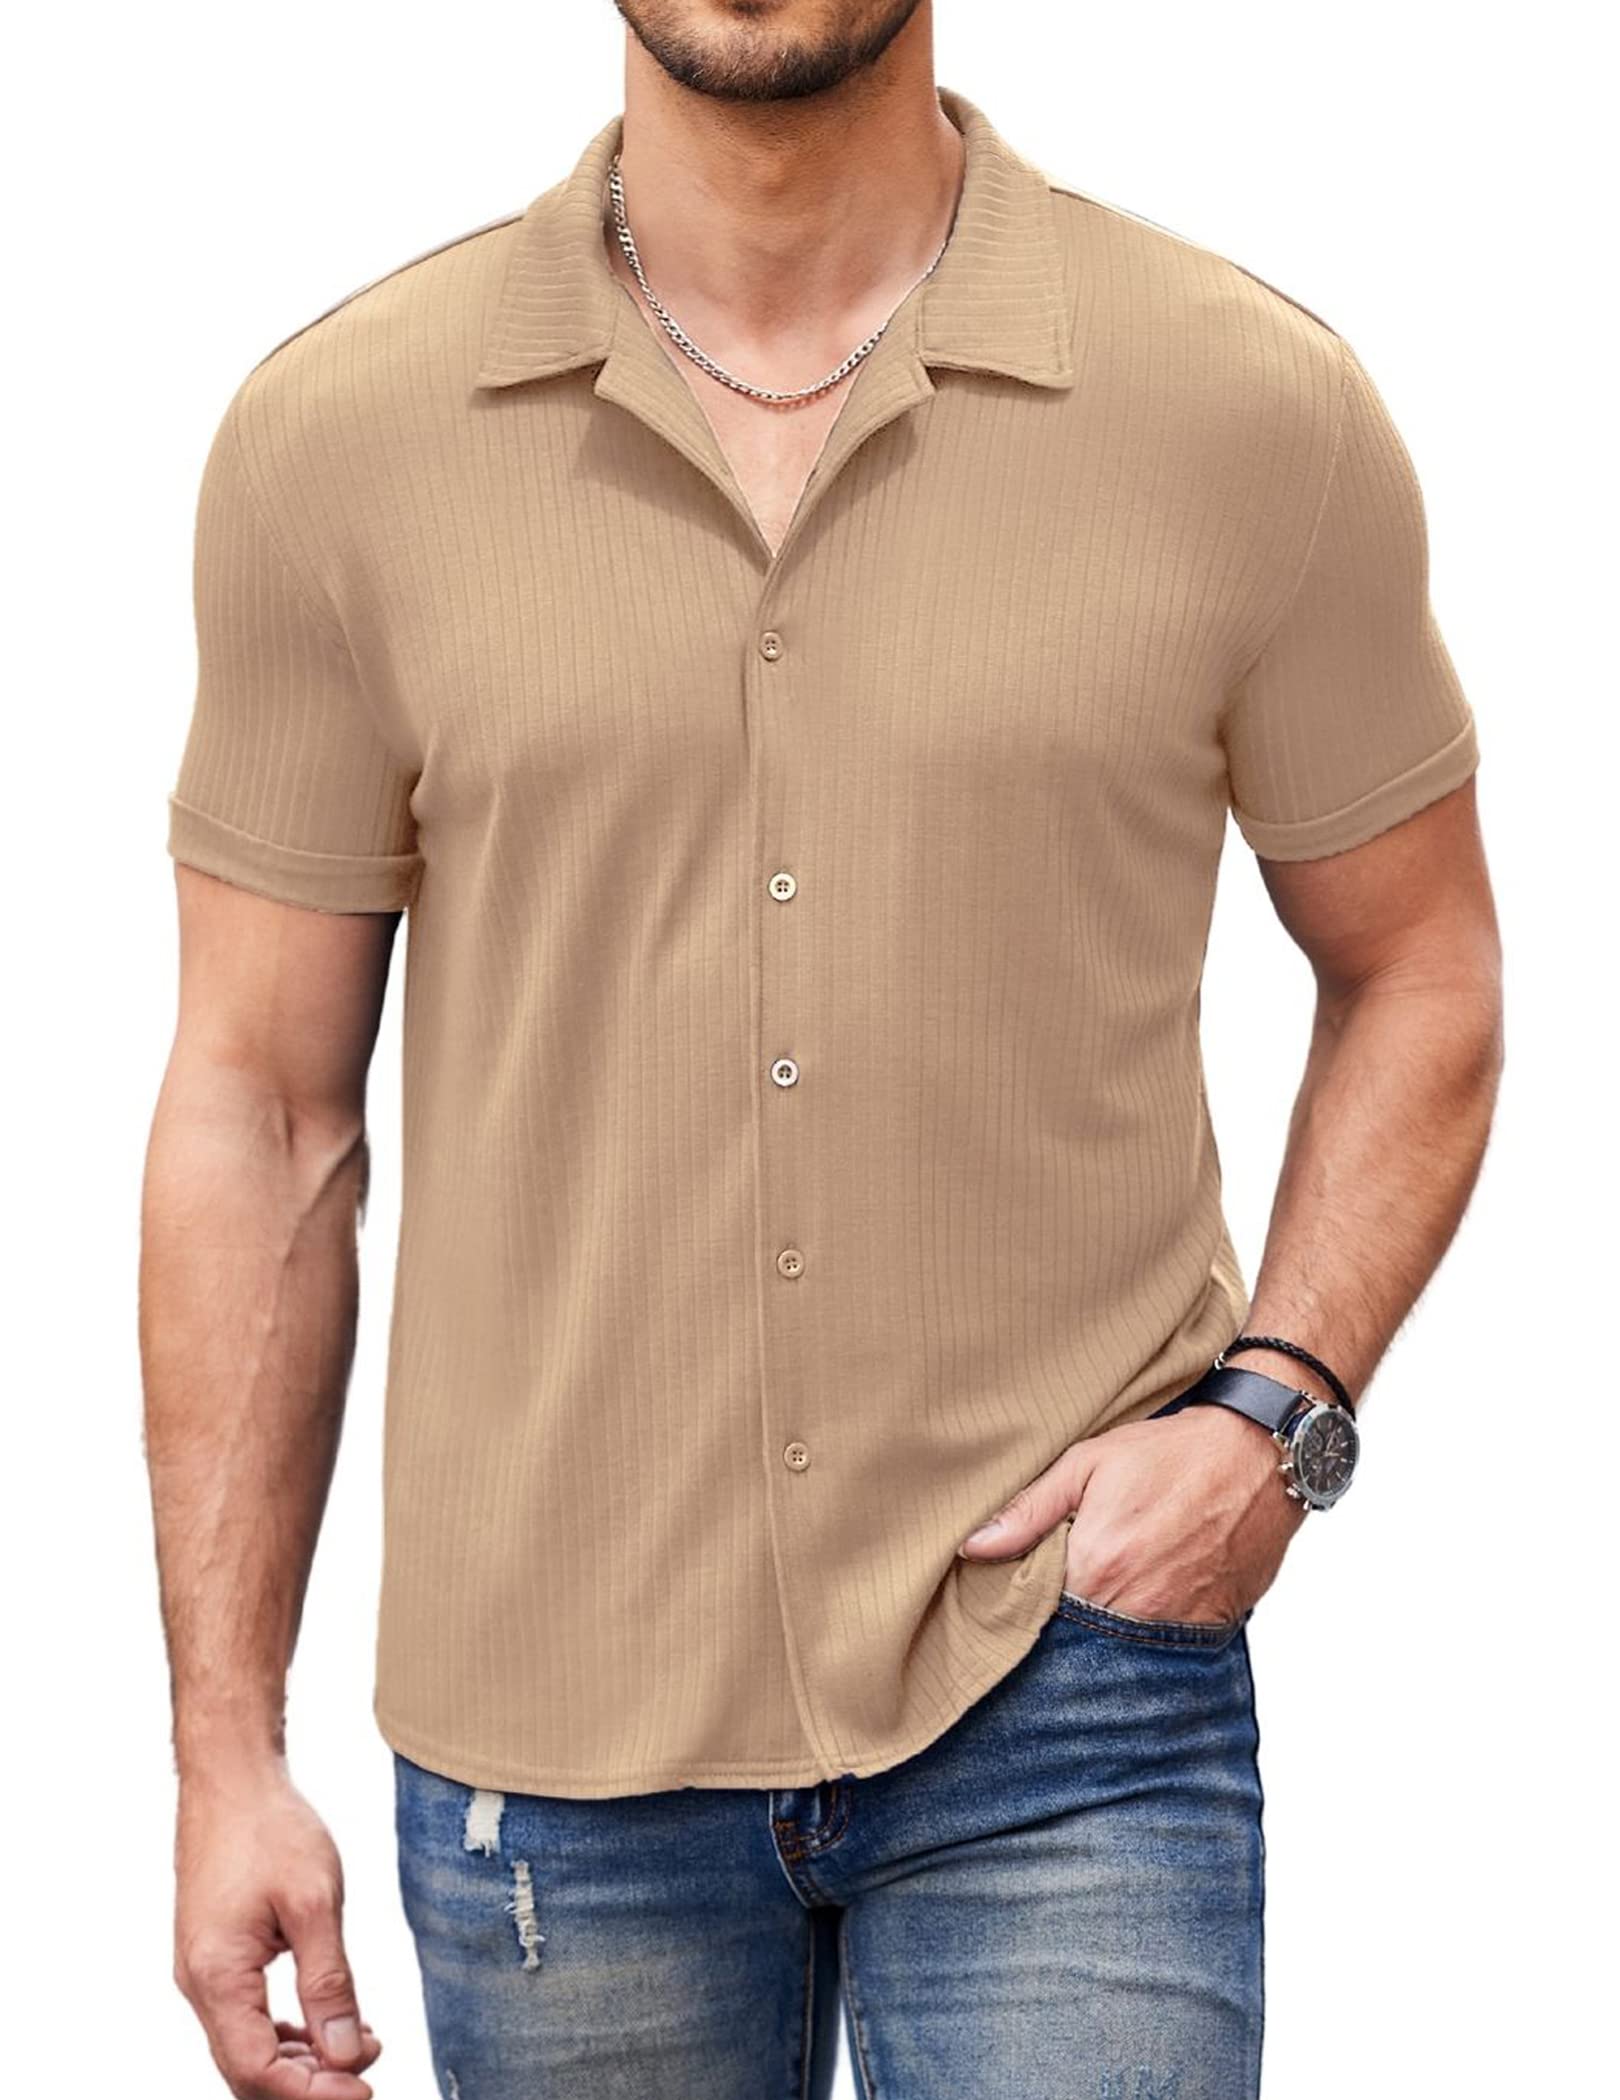 Men's Solid Color Knitted Cotton Stretch Casual Everyday Shirt-Garamode